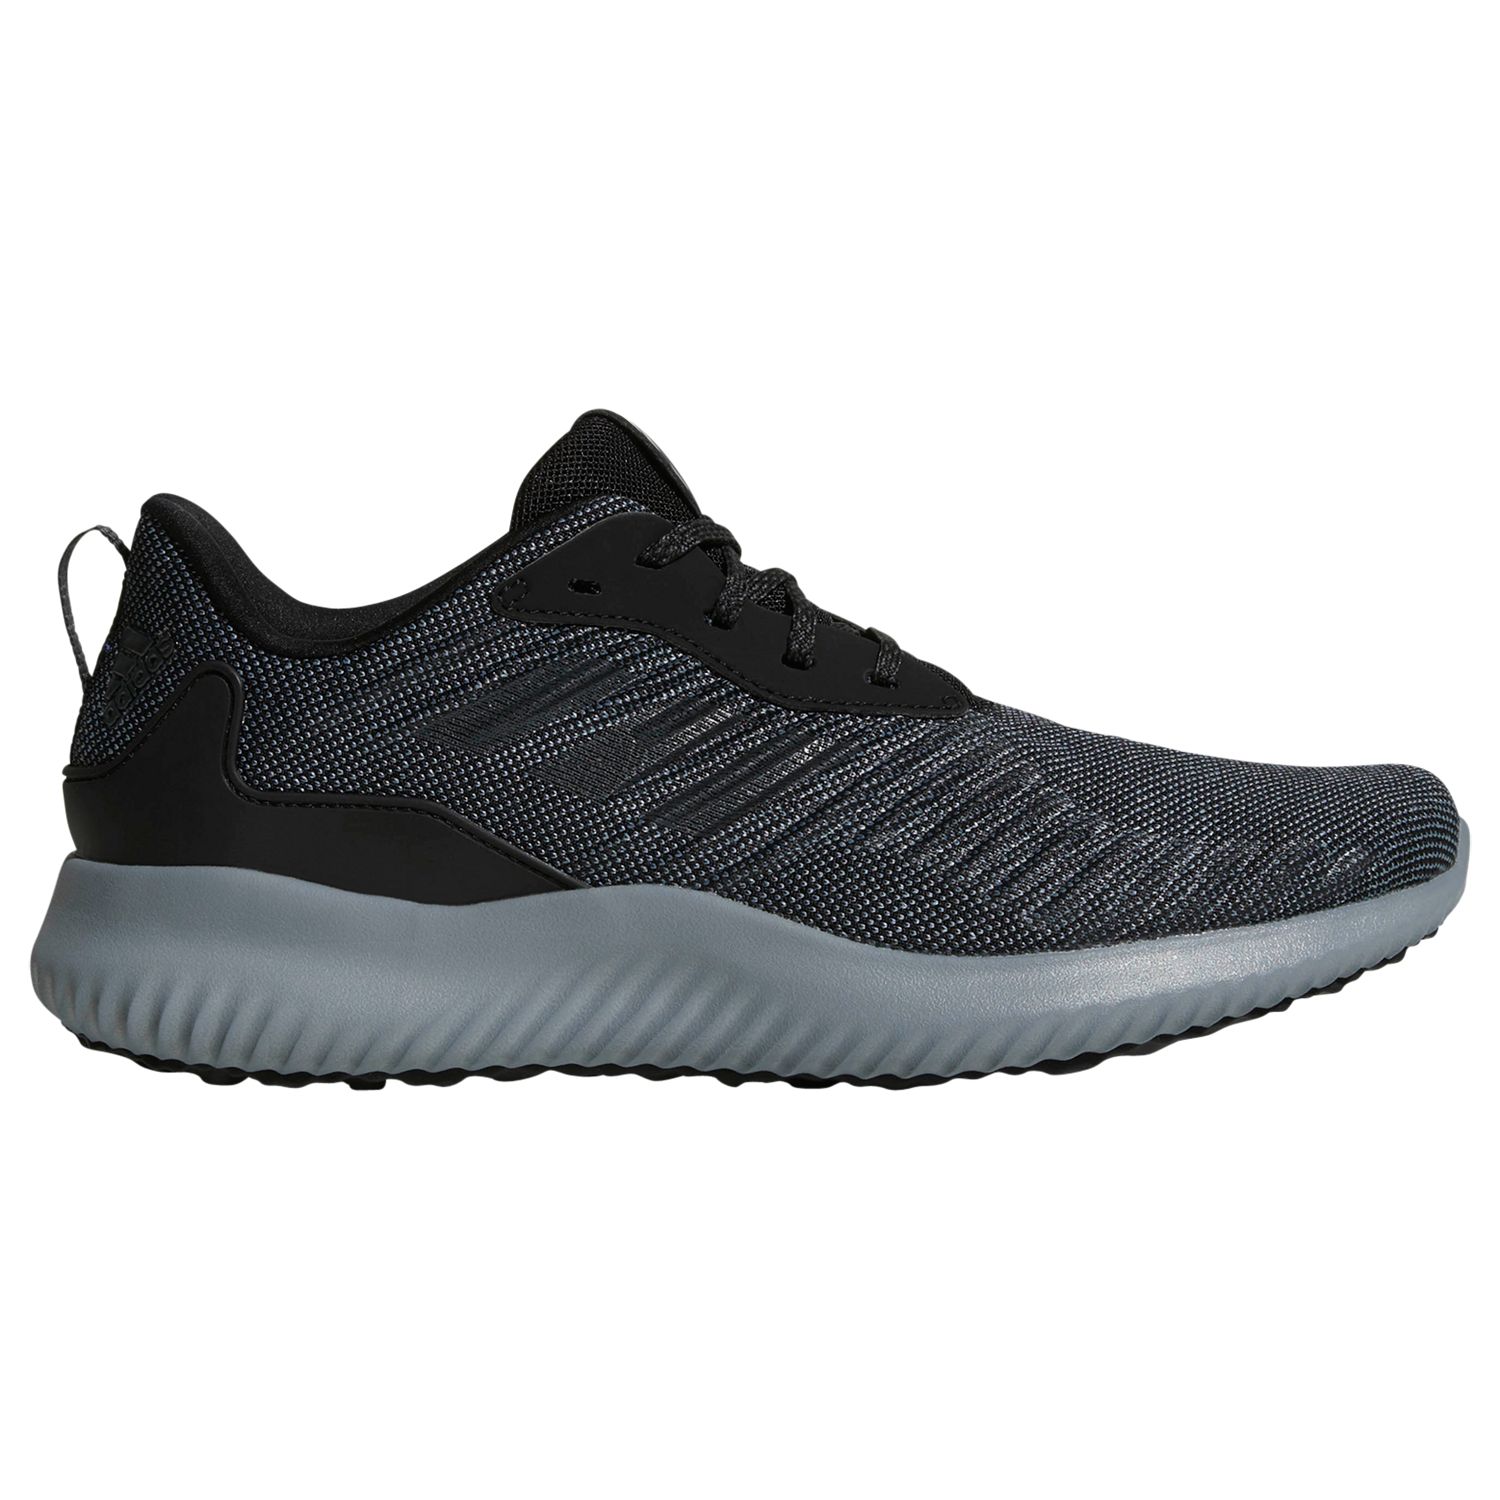 adidas Alphabounce RC Men's Running Shoes, Black, 9